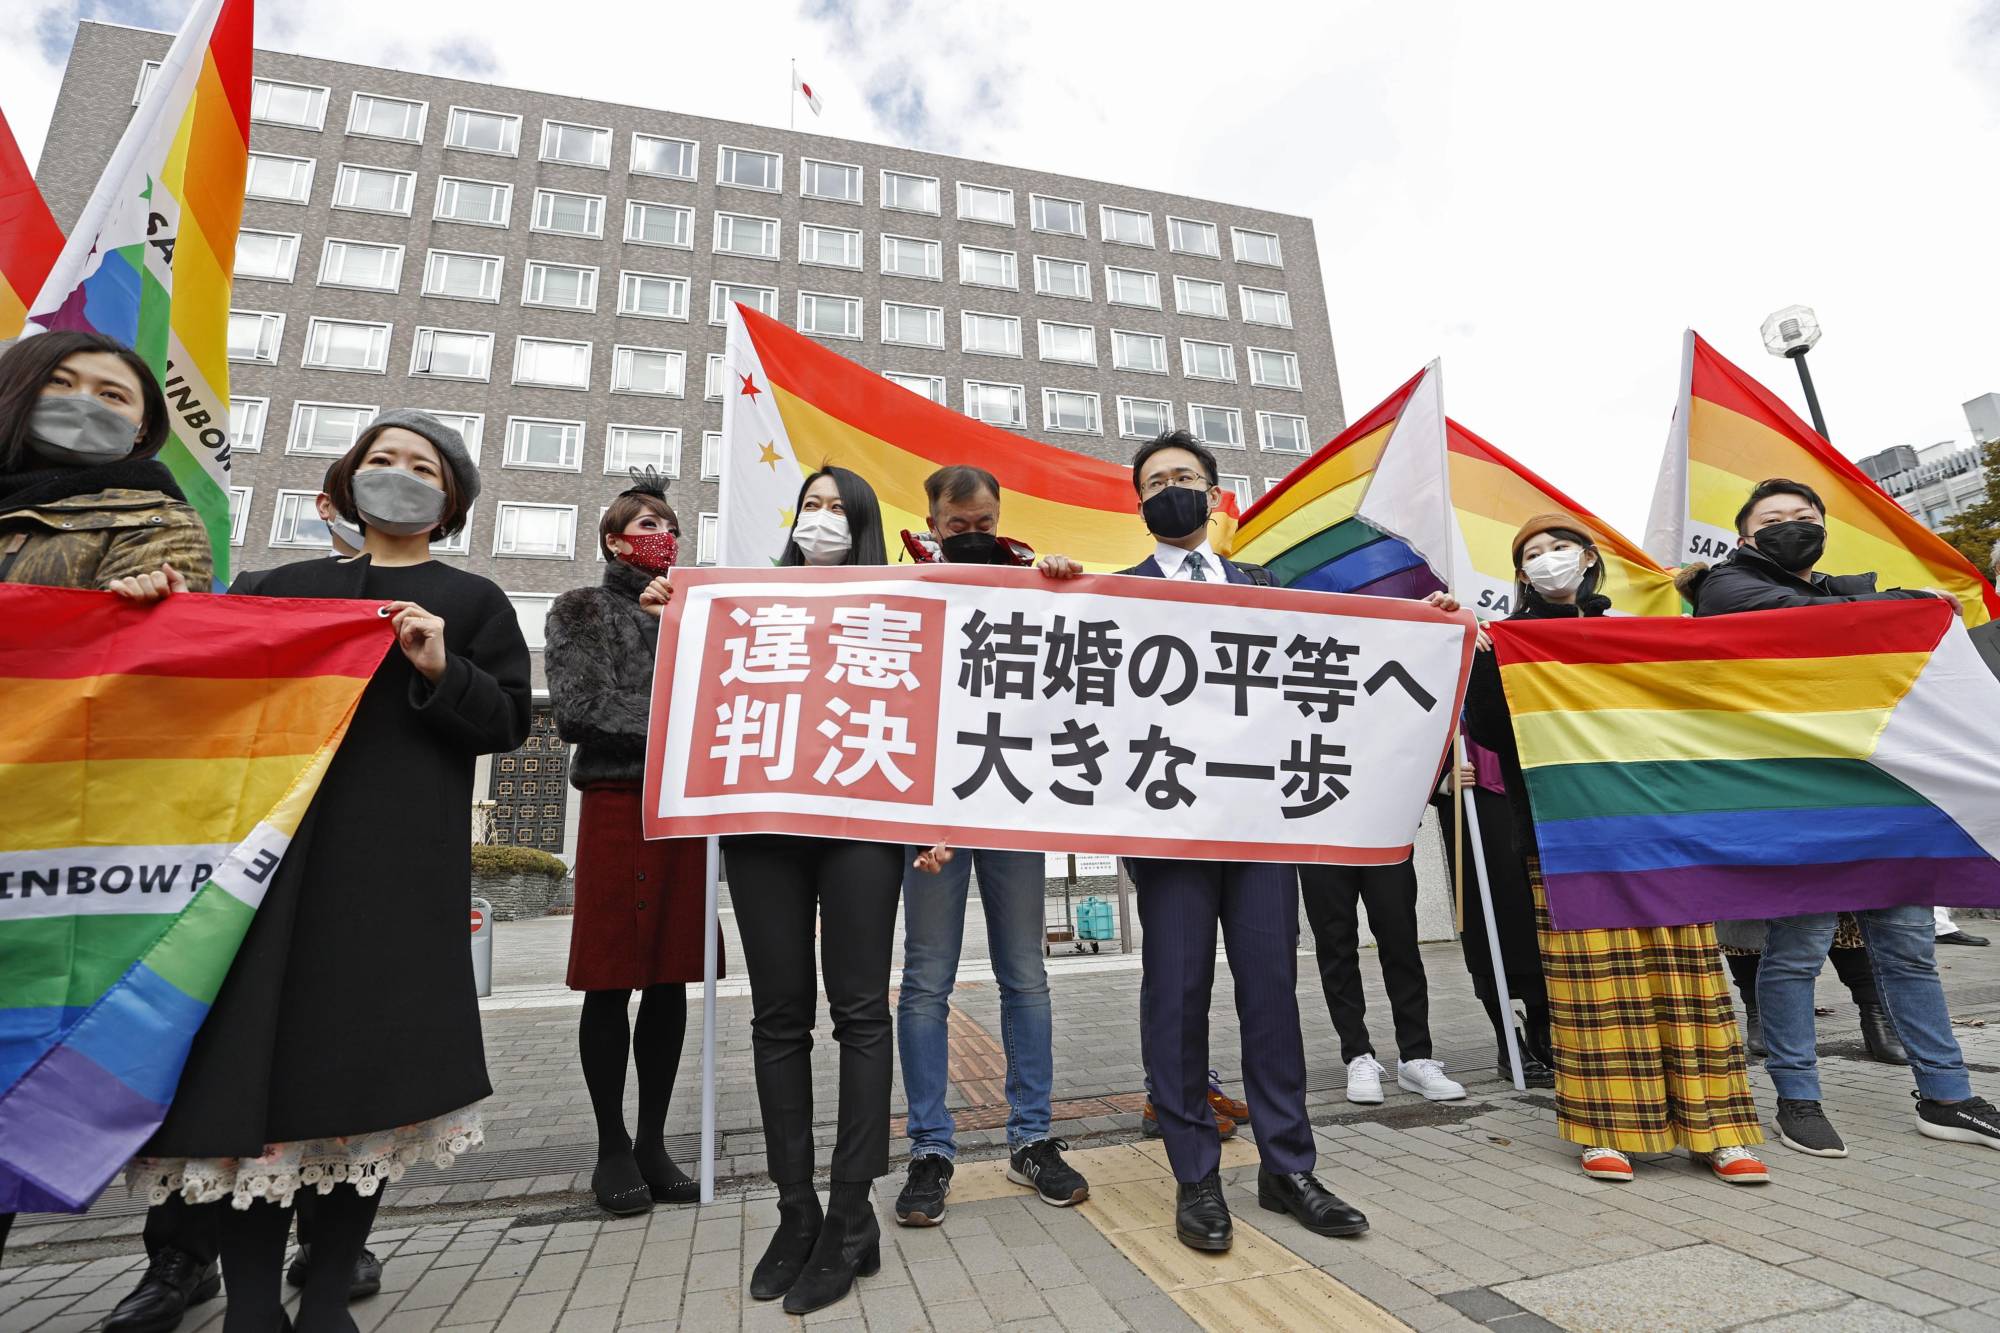 Lawyers and supporters of plaintiffs hold signs and flags outside the Sapporo District Court on Wednesday hailing a court decision that said Japan's failure to recognize same-sex marriage is unconstitutional. The sign says that the ruling is a 'big step forward for marriage equality.'  | KYODO